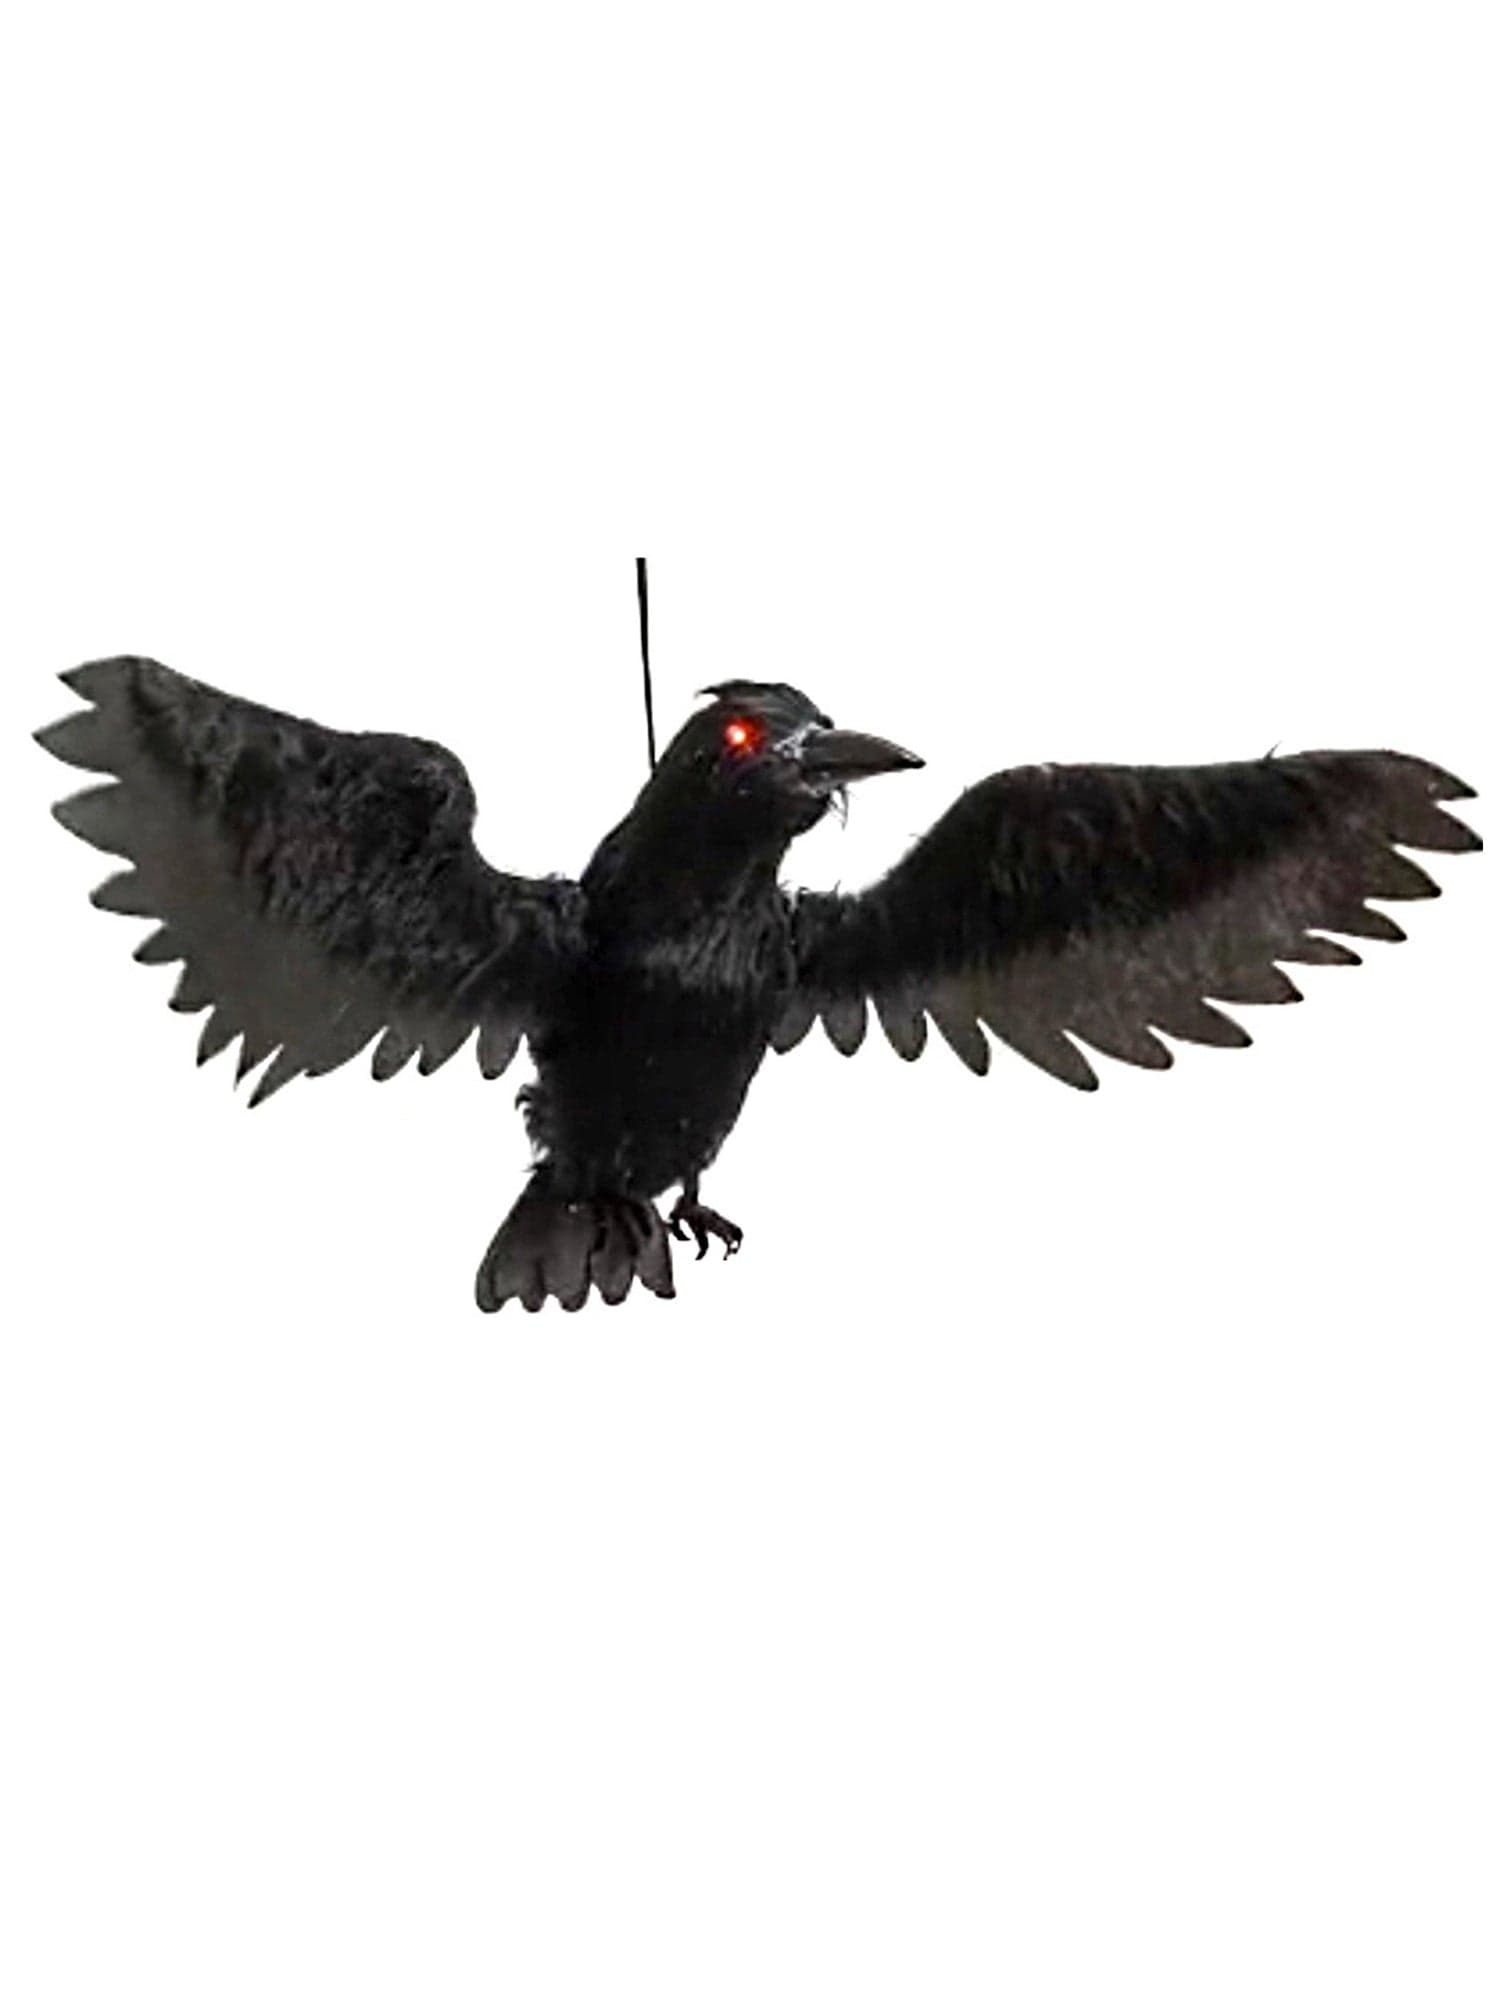 20 Inch Flying Crow Light Up Animated Prop - costumes.com